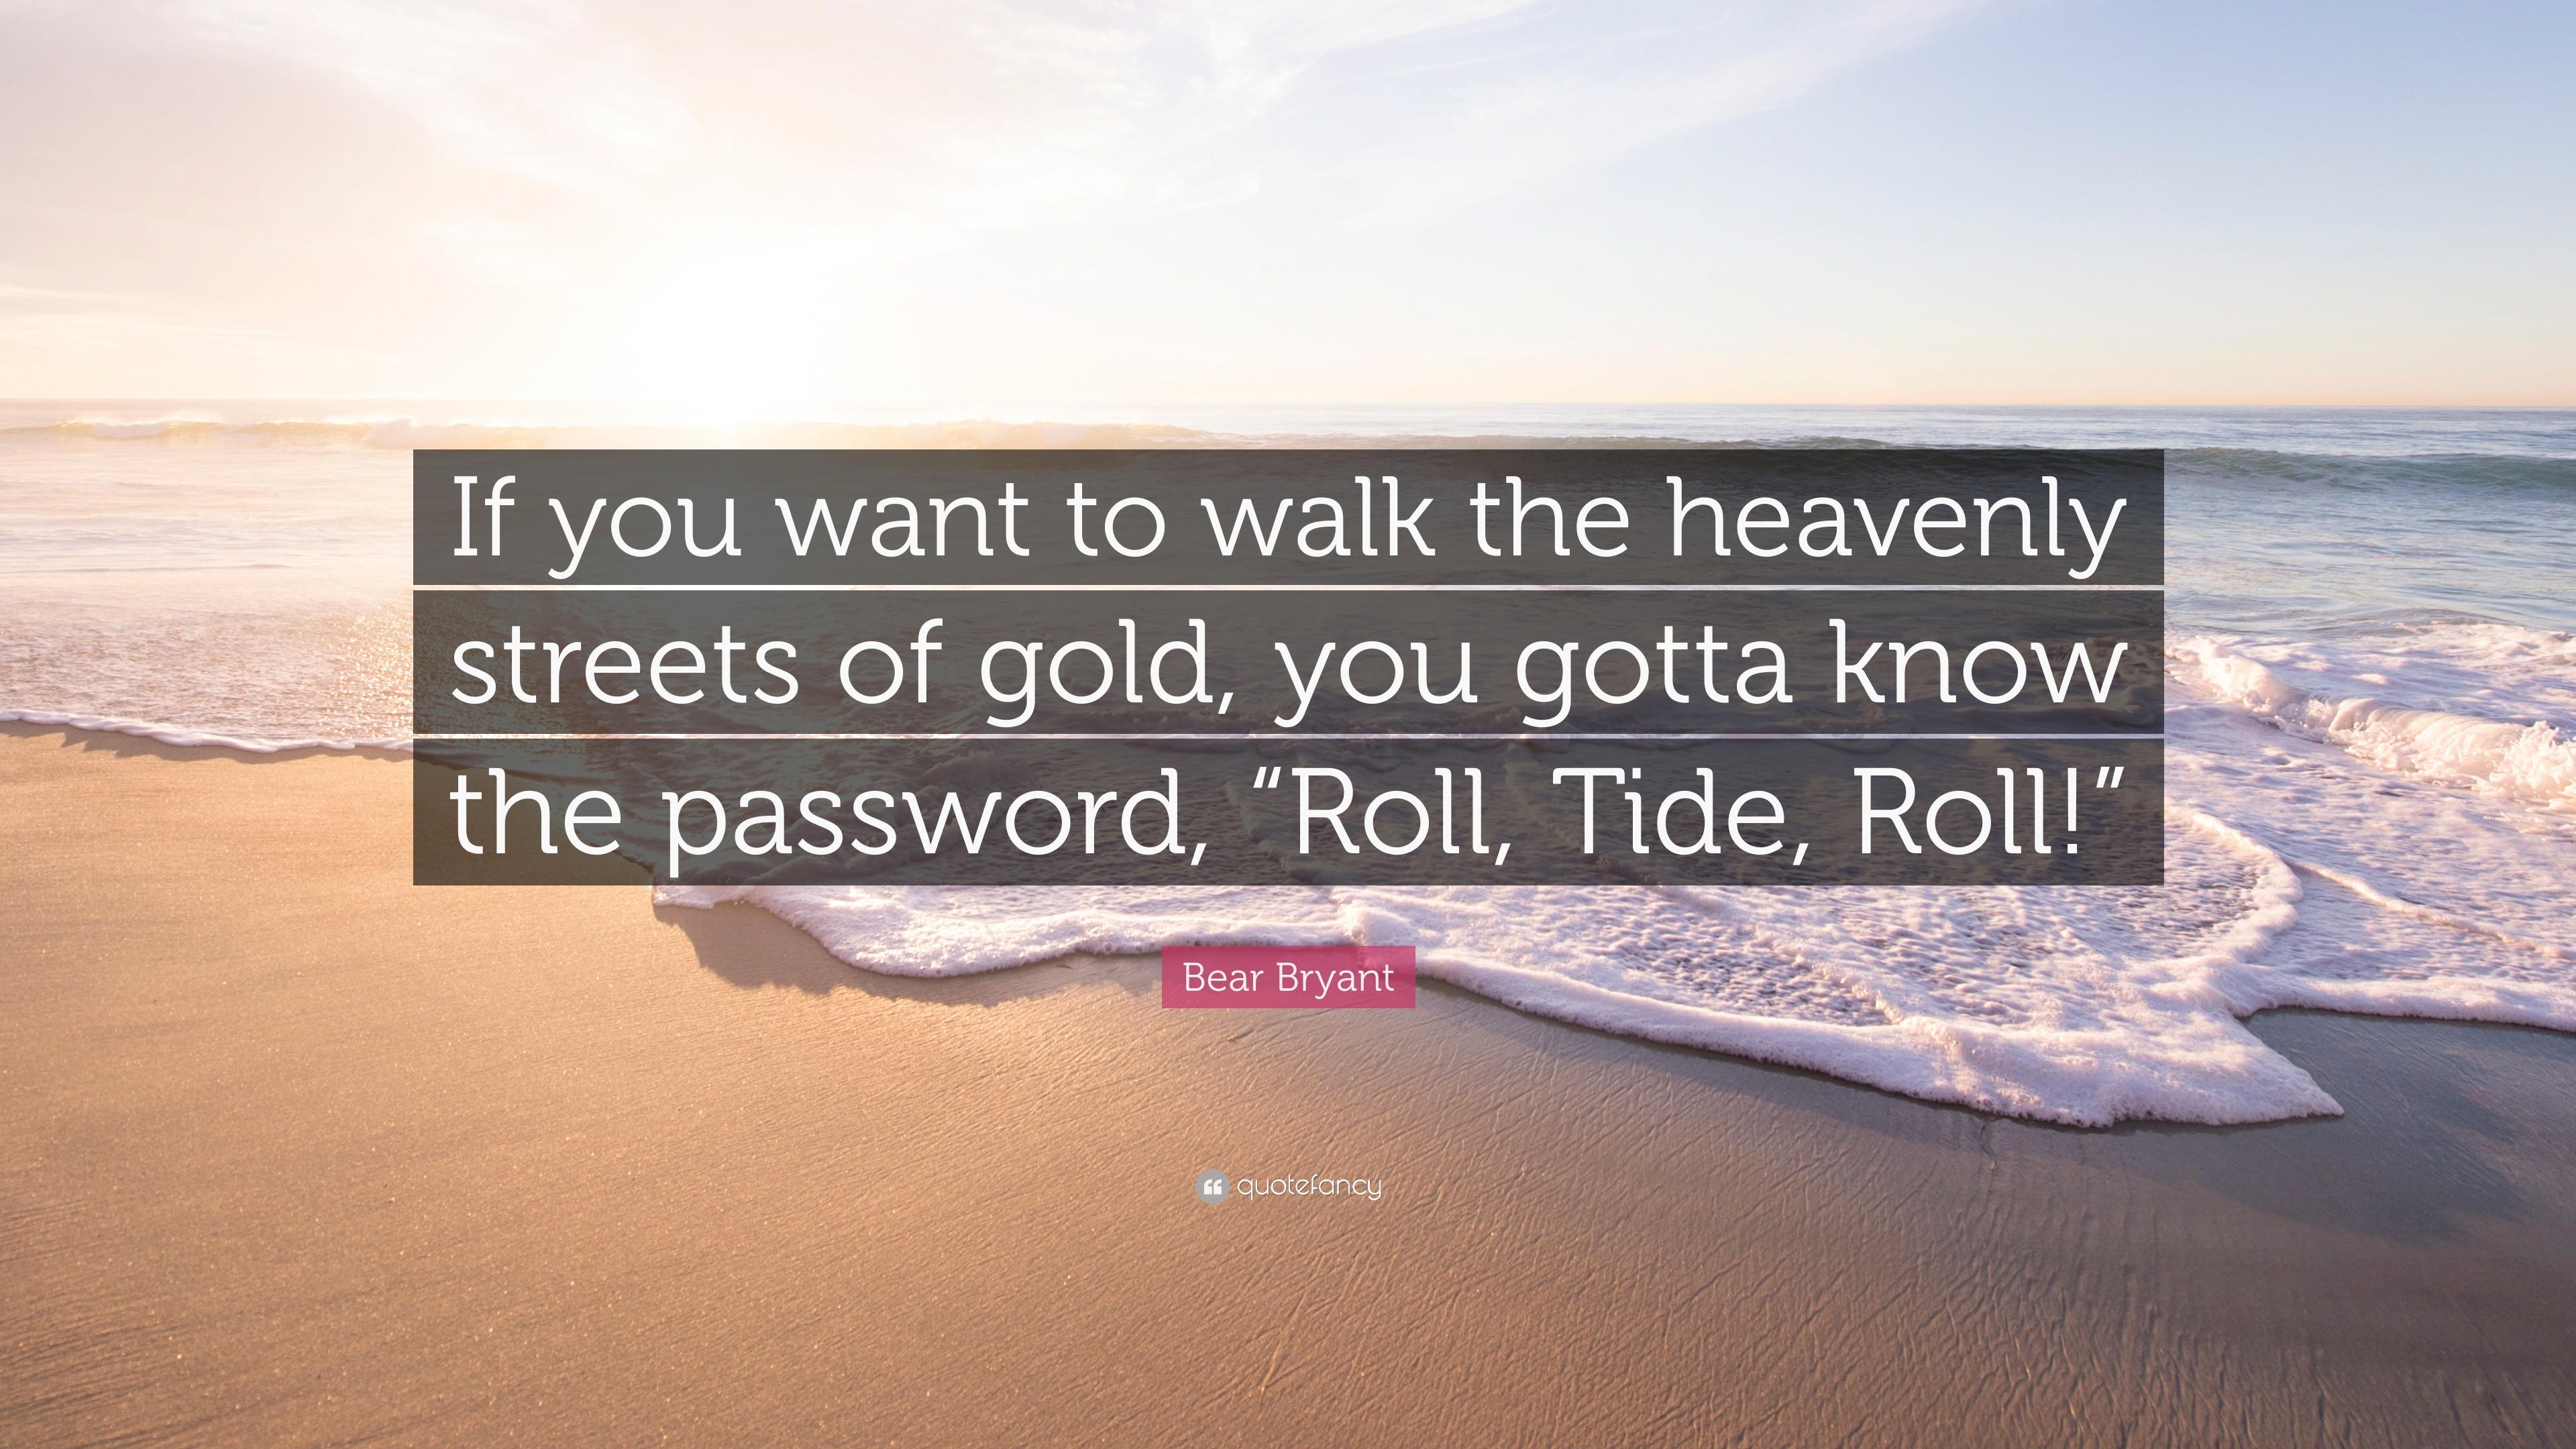 3840x2160 Bear Bryant Quote: “If you want to walk the heavenly streets of gold,